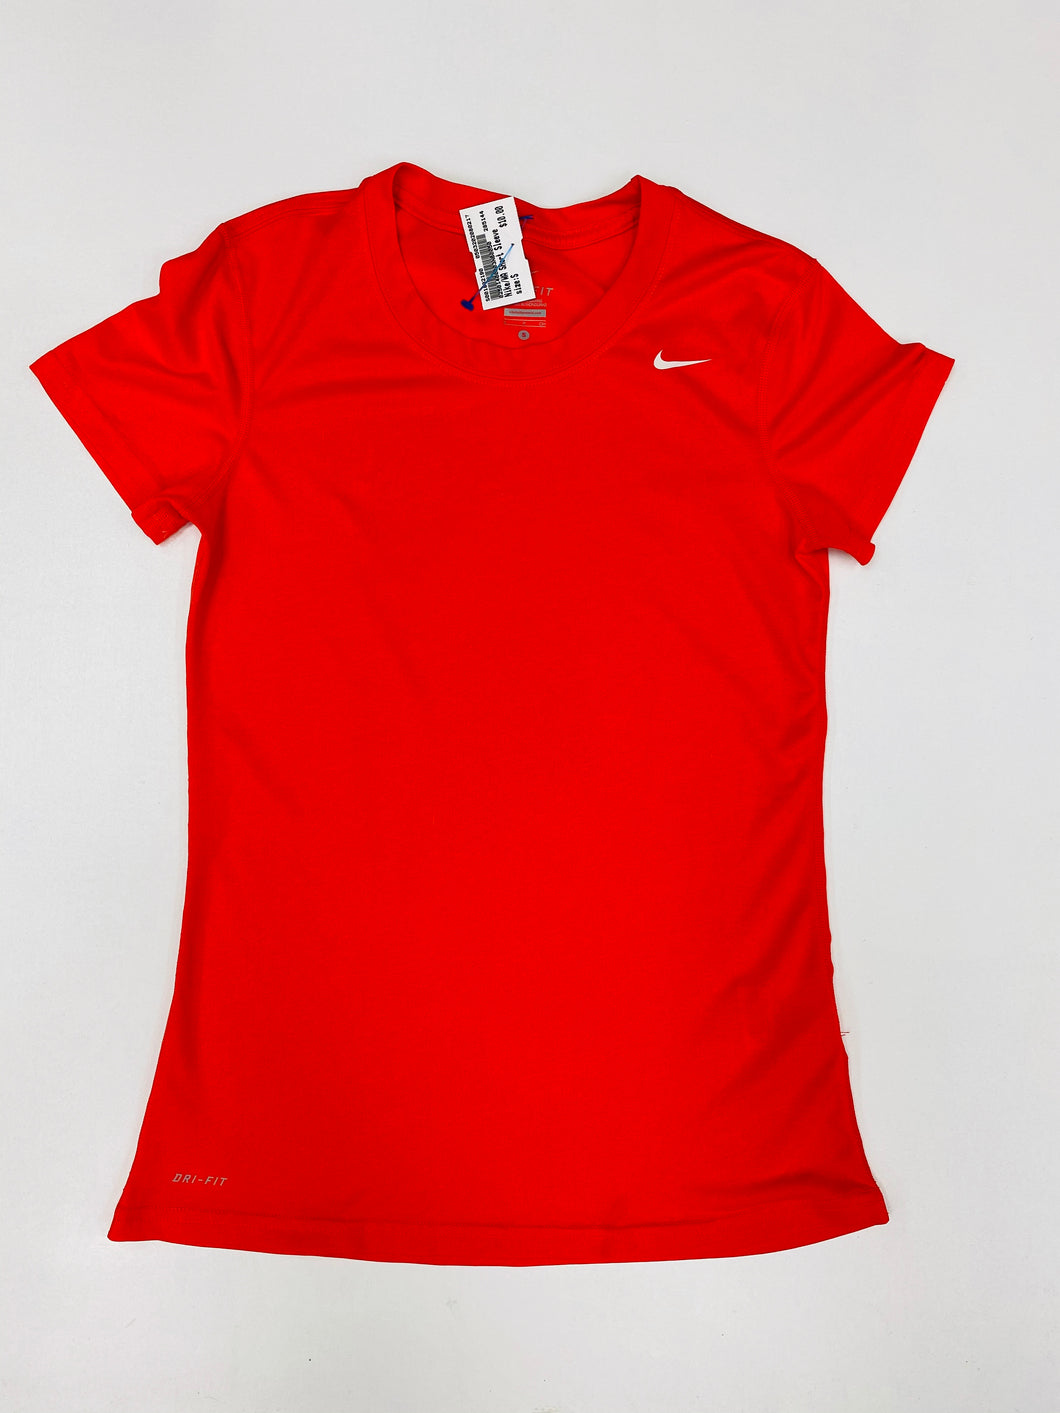 Nike Womens Athletic Top Small-329CCED5-47A3-4BC5-9447-D6EC1551531F.jpeg